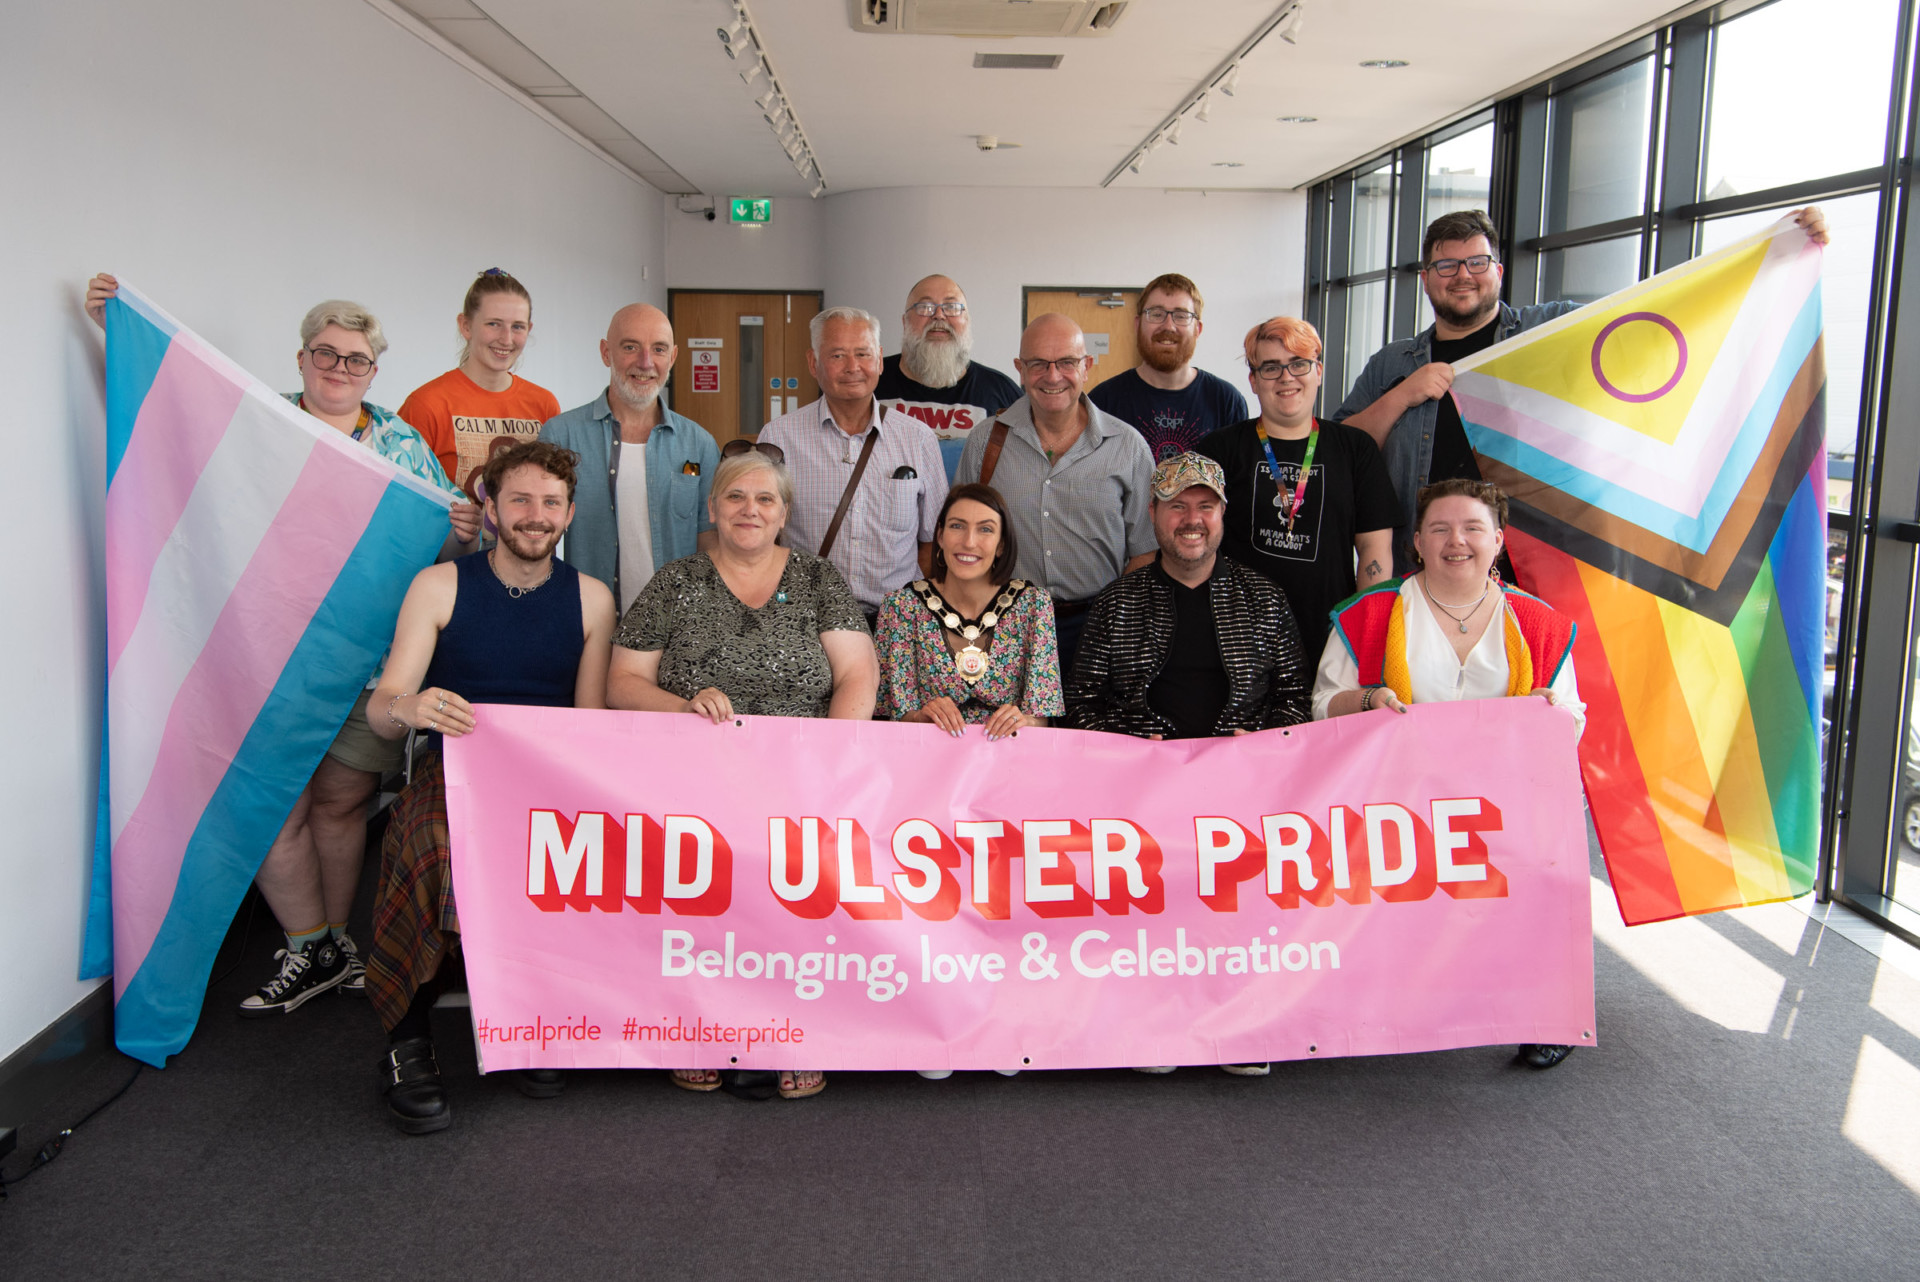 Mid Ulster Pride reaches out through new events